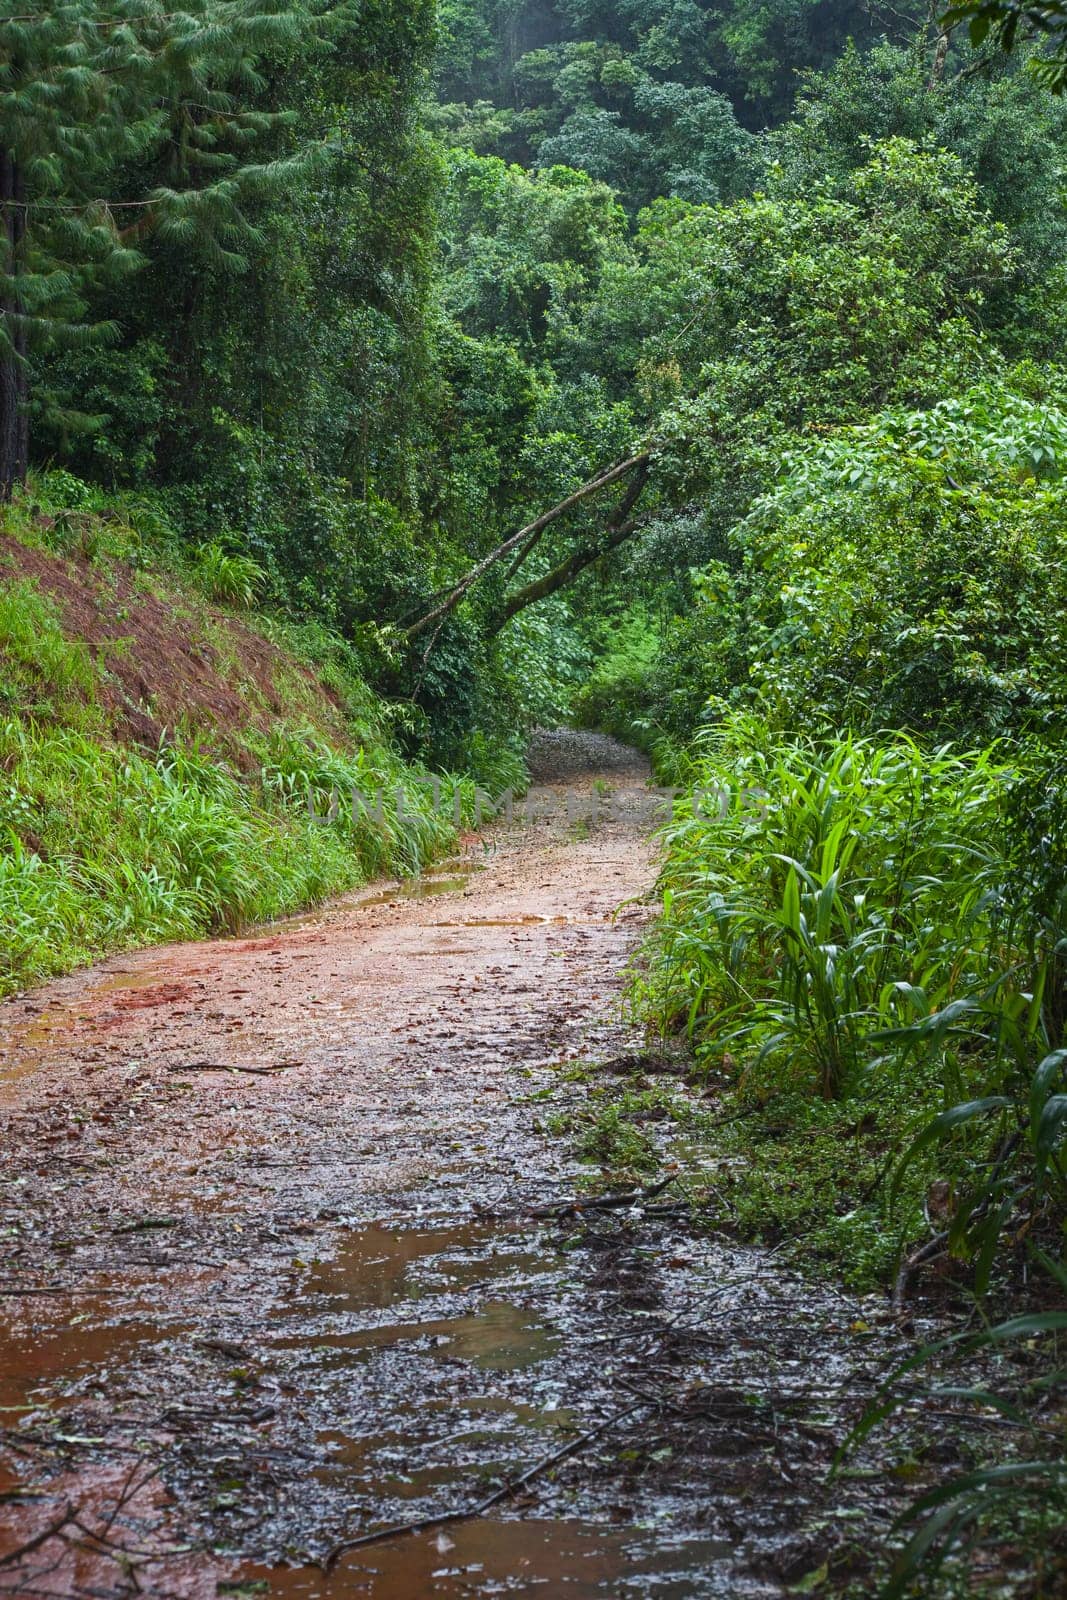 A wet road in the Magoebaskloof rainforest. South Africa